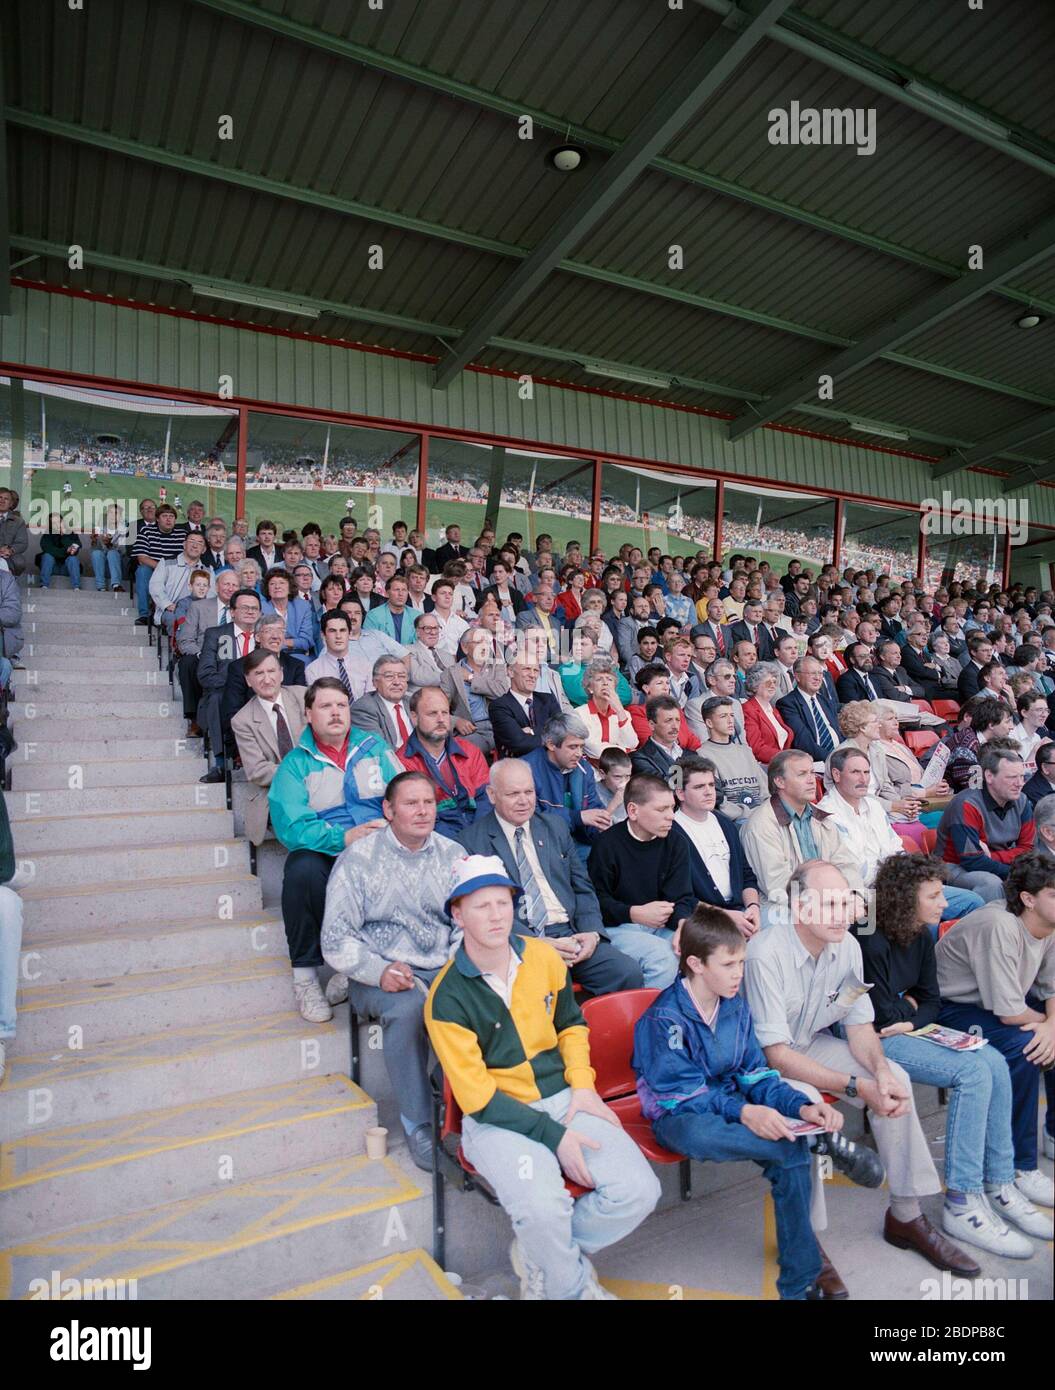 August 1990, friendly football match at Walsall FC, versus Aston Villa, to mark the opening of the new stadium, West Midlands, UK Stock Photo